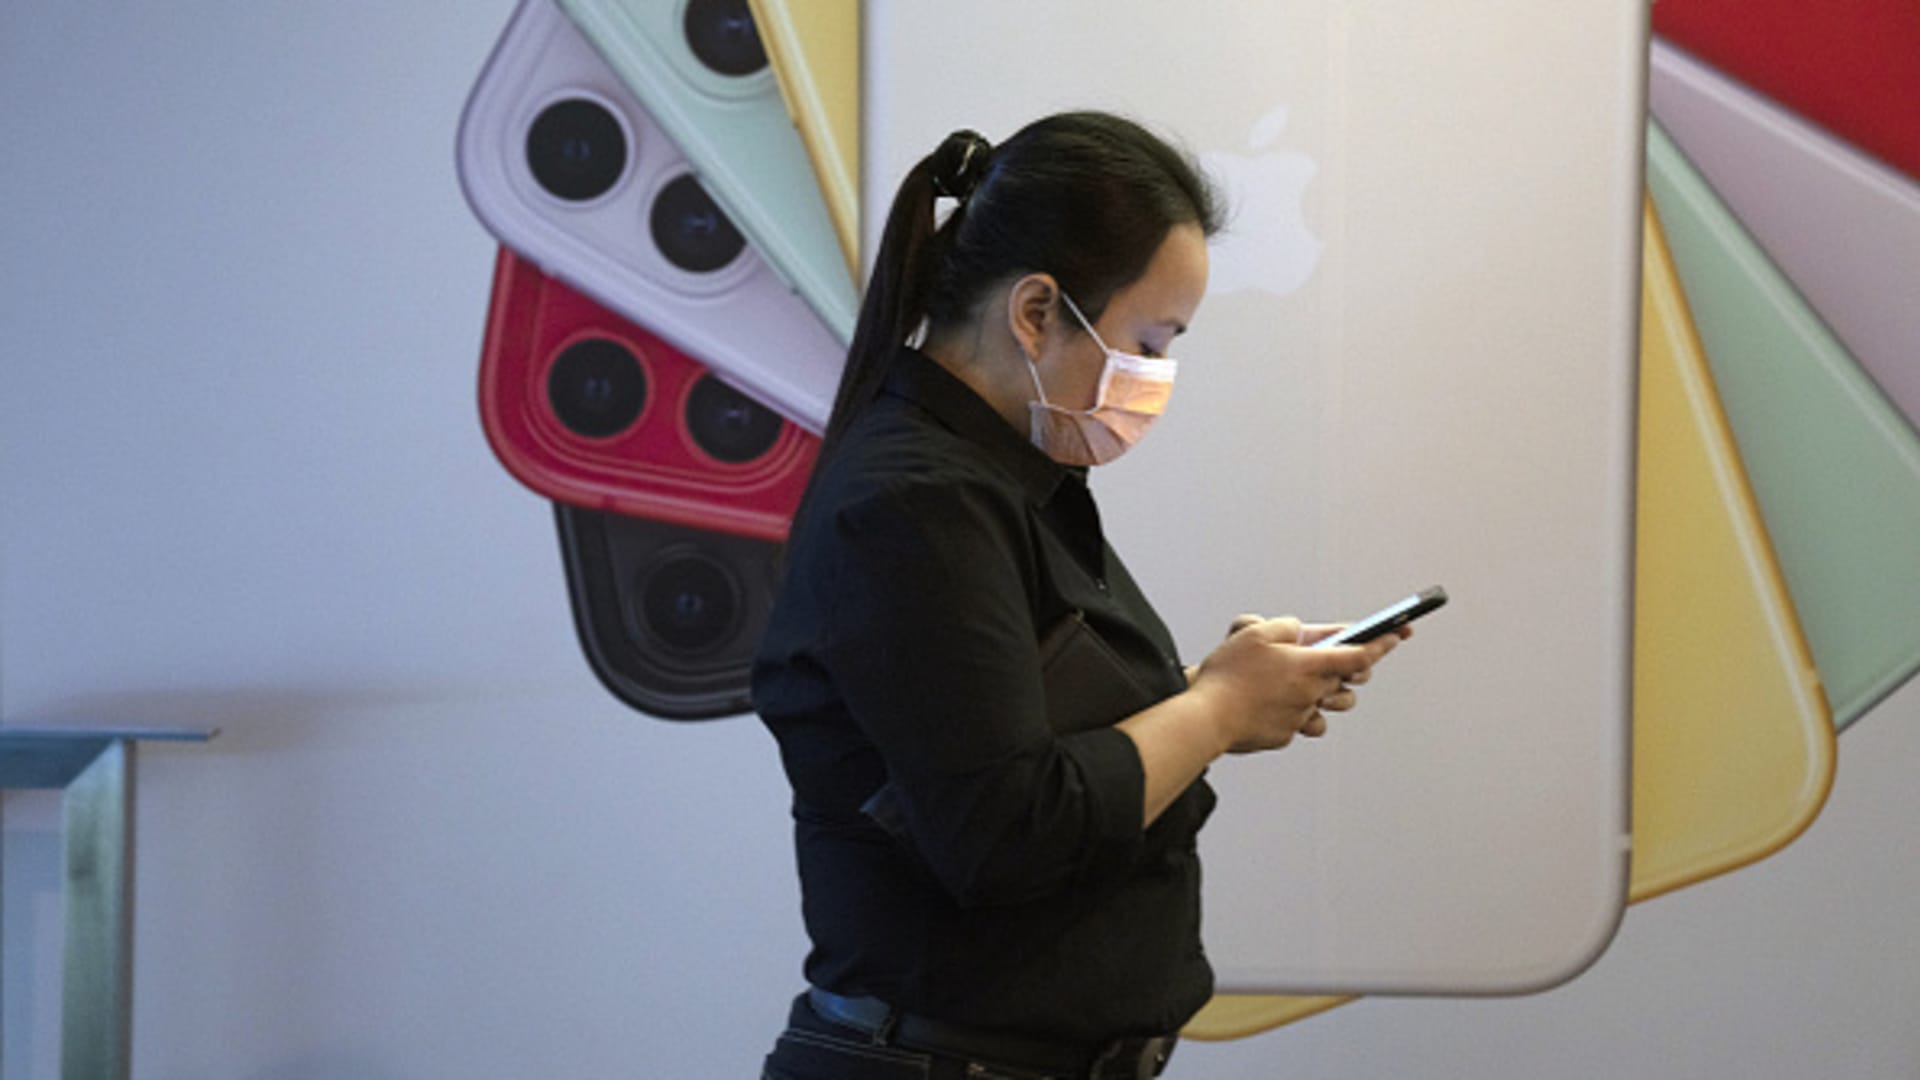 A pedestrian wearing a protective mask uses her mobile phone while walking past an Apple iPhone advertisement at Orchard Road in Singapore.